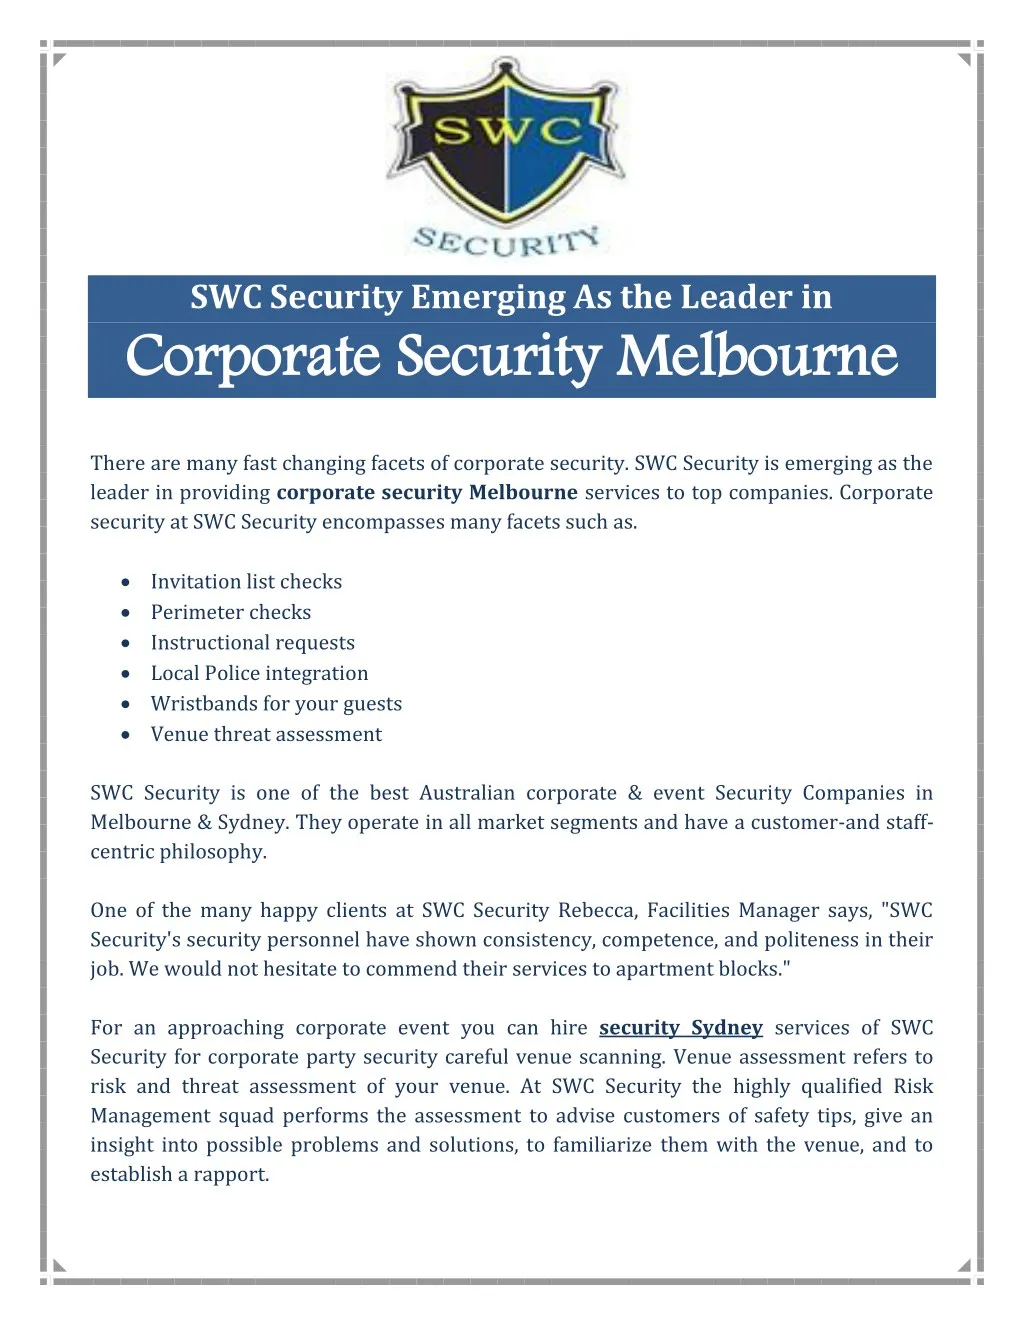 swc security emerging as the leader in corporate